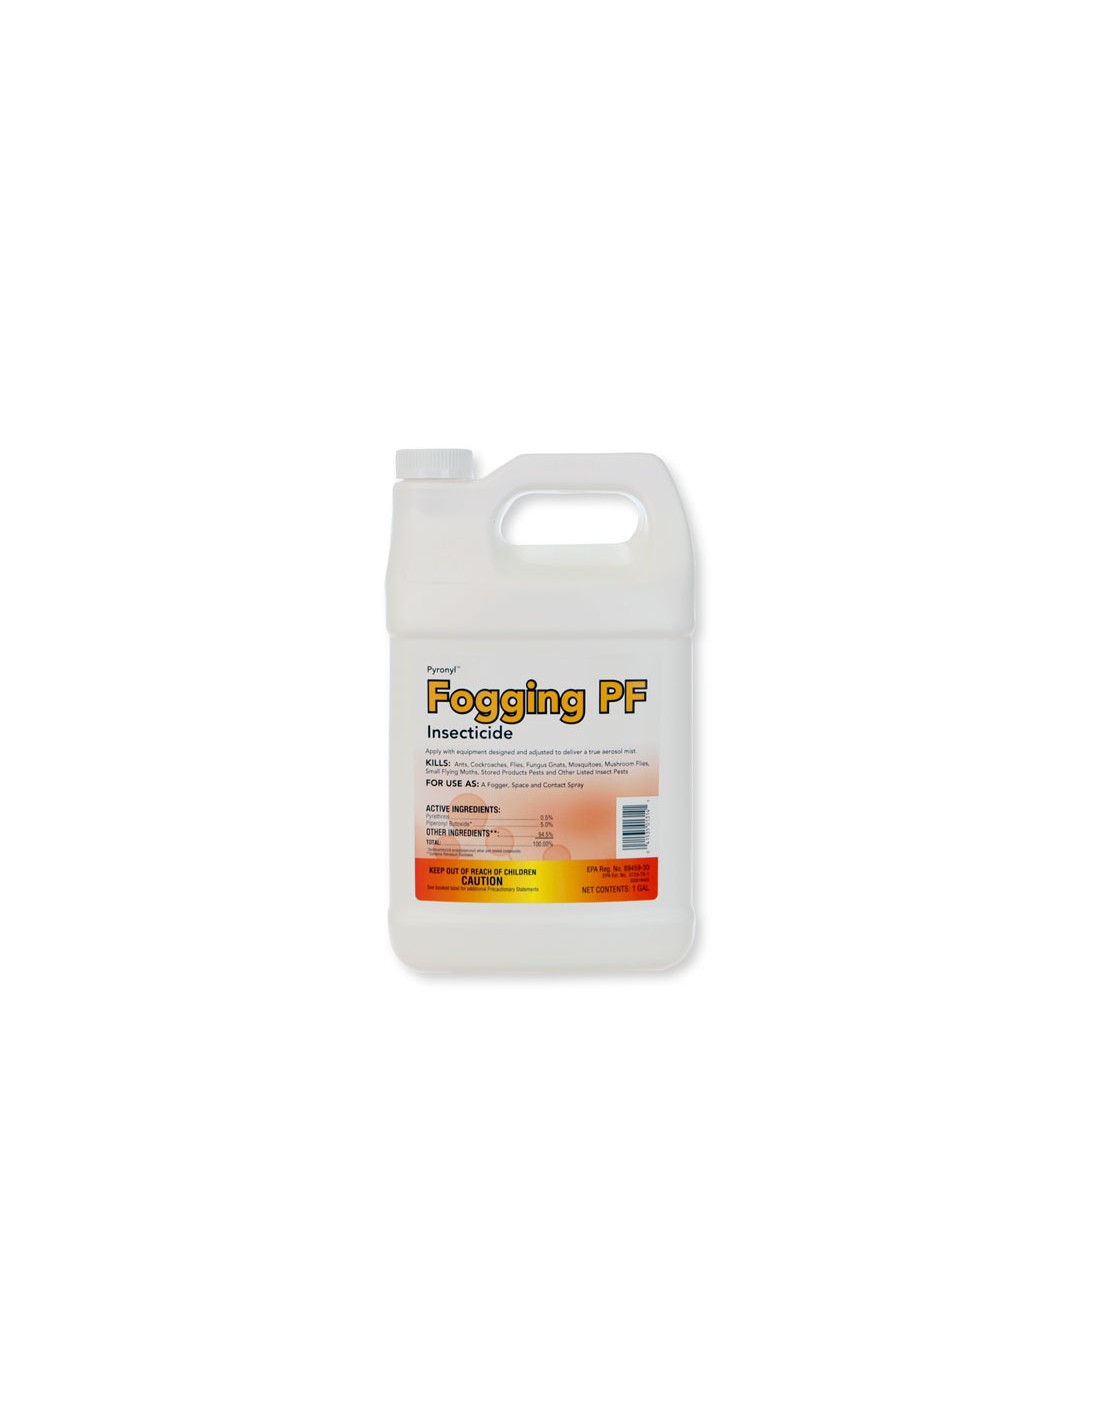 Pyronyl Fogging Insecticide PF Questions & Answers